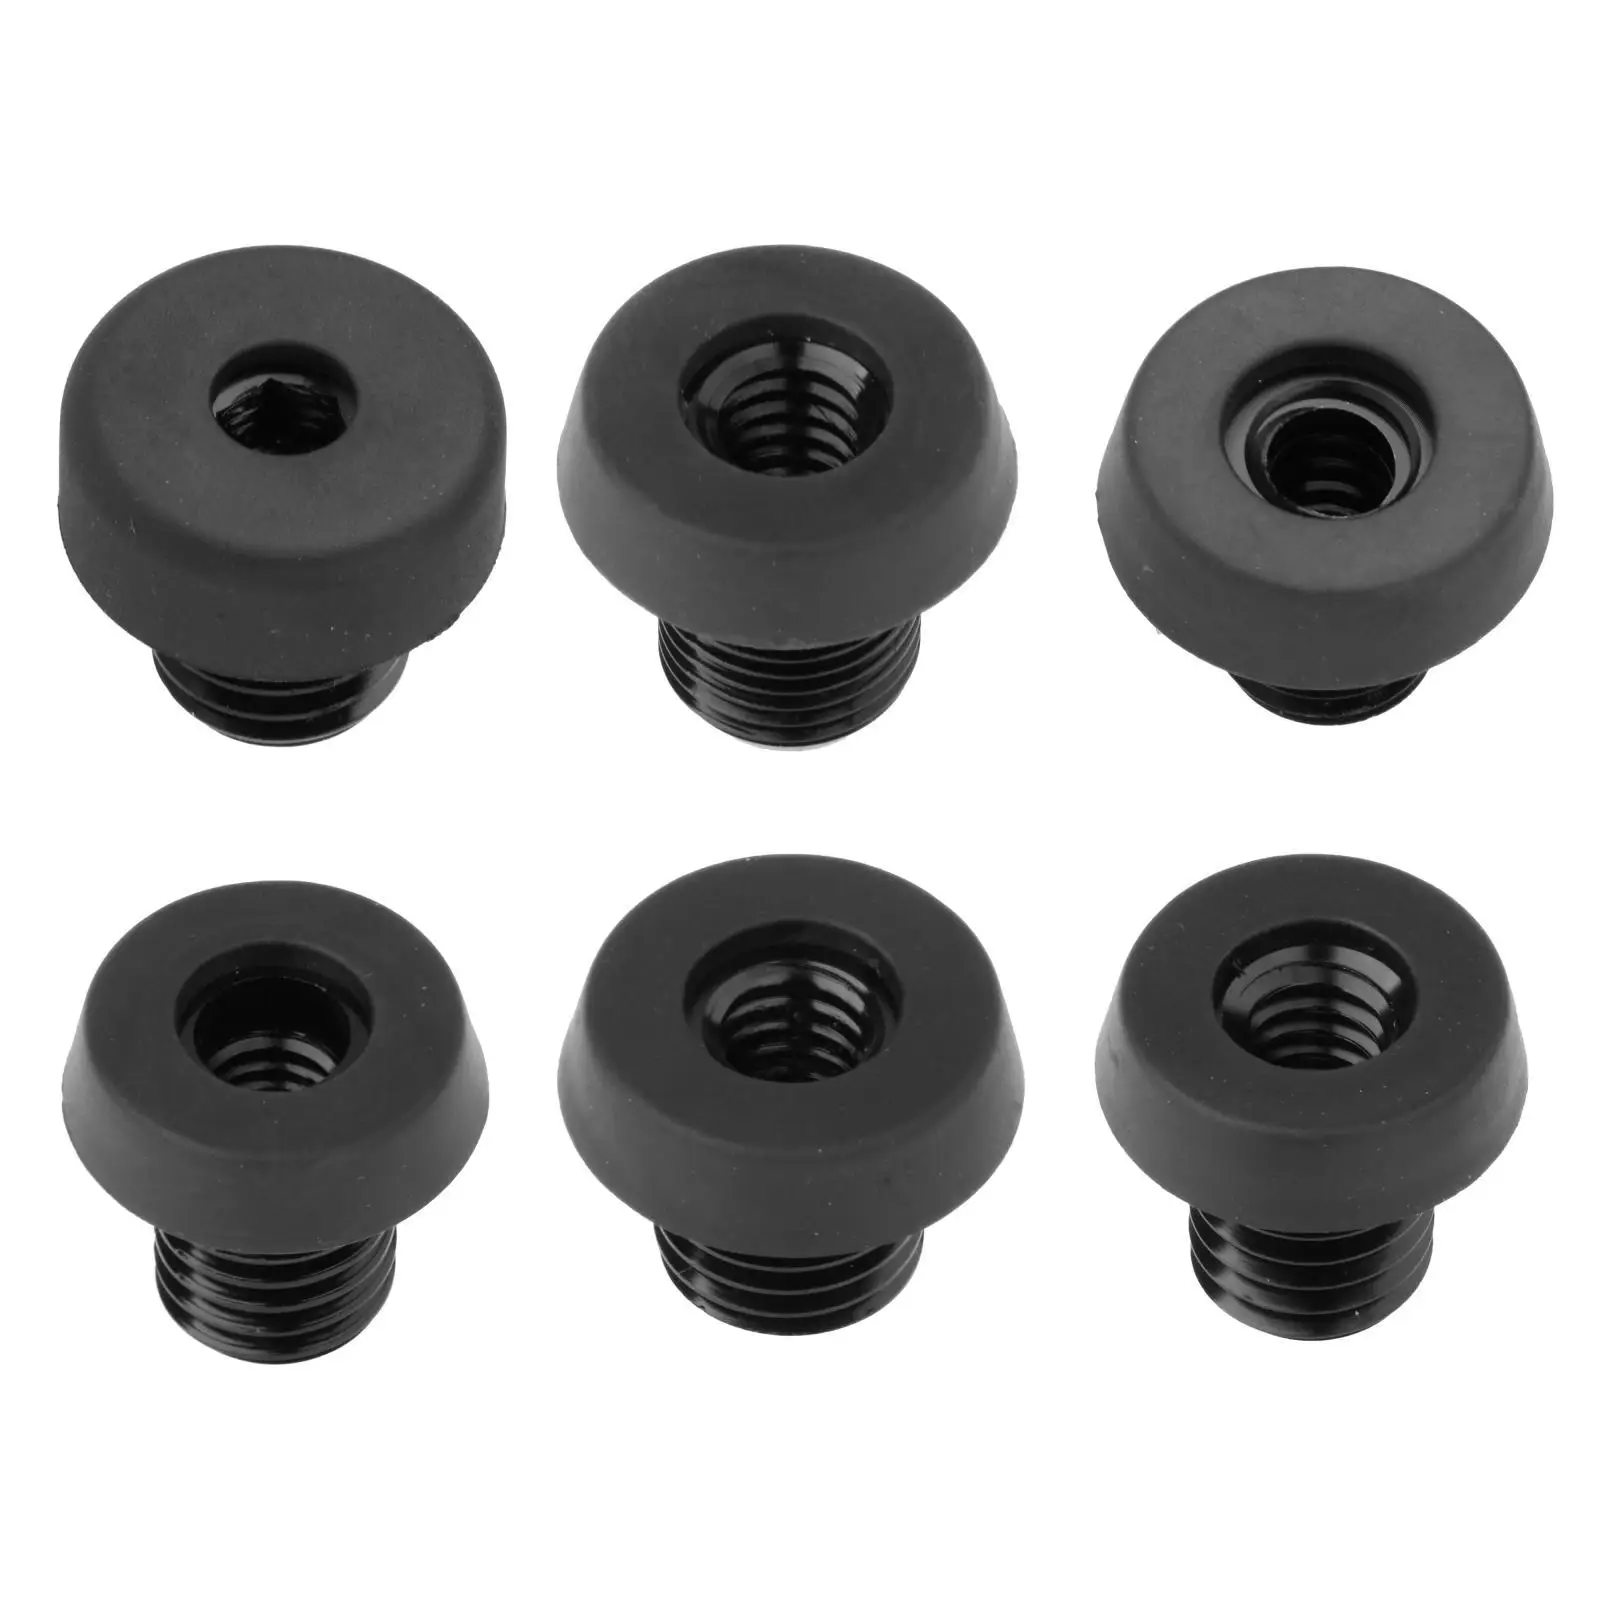 Billiard Bottom Plug Convenient for Playing Clubs Pool Table Most Pool Cues